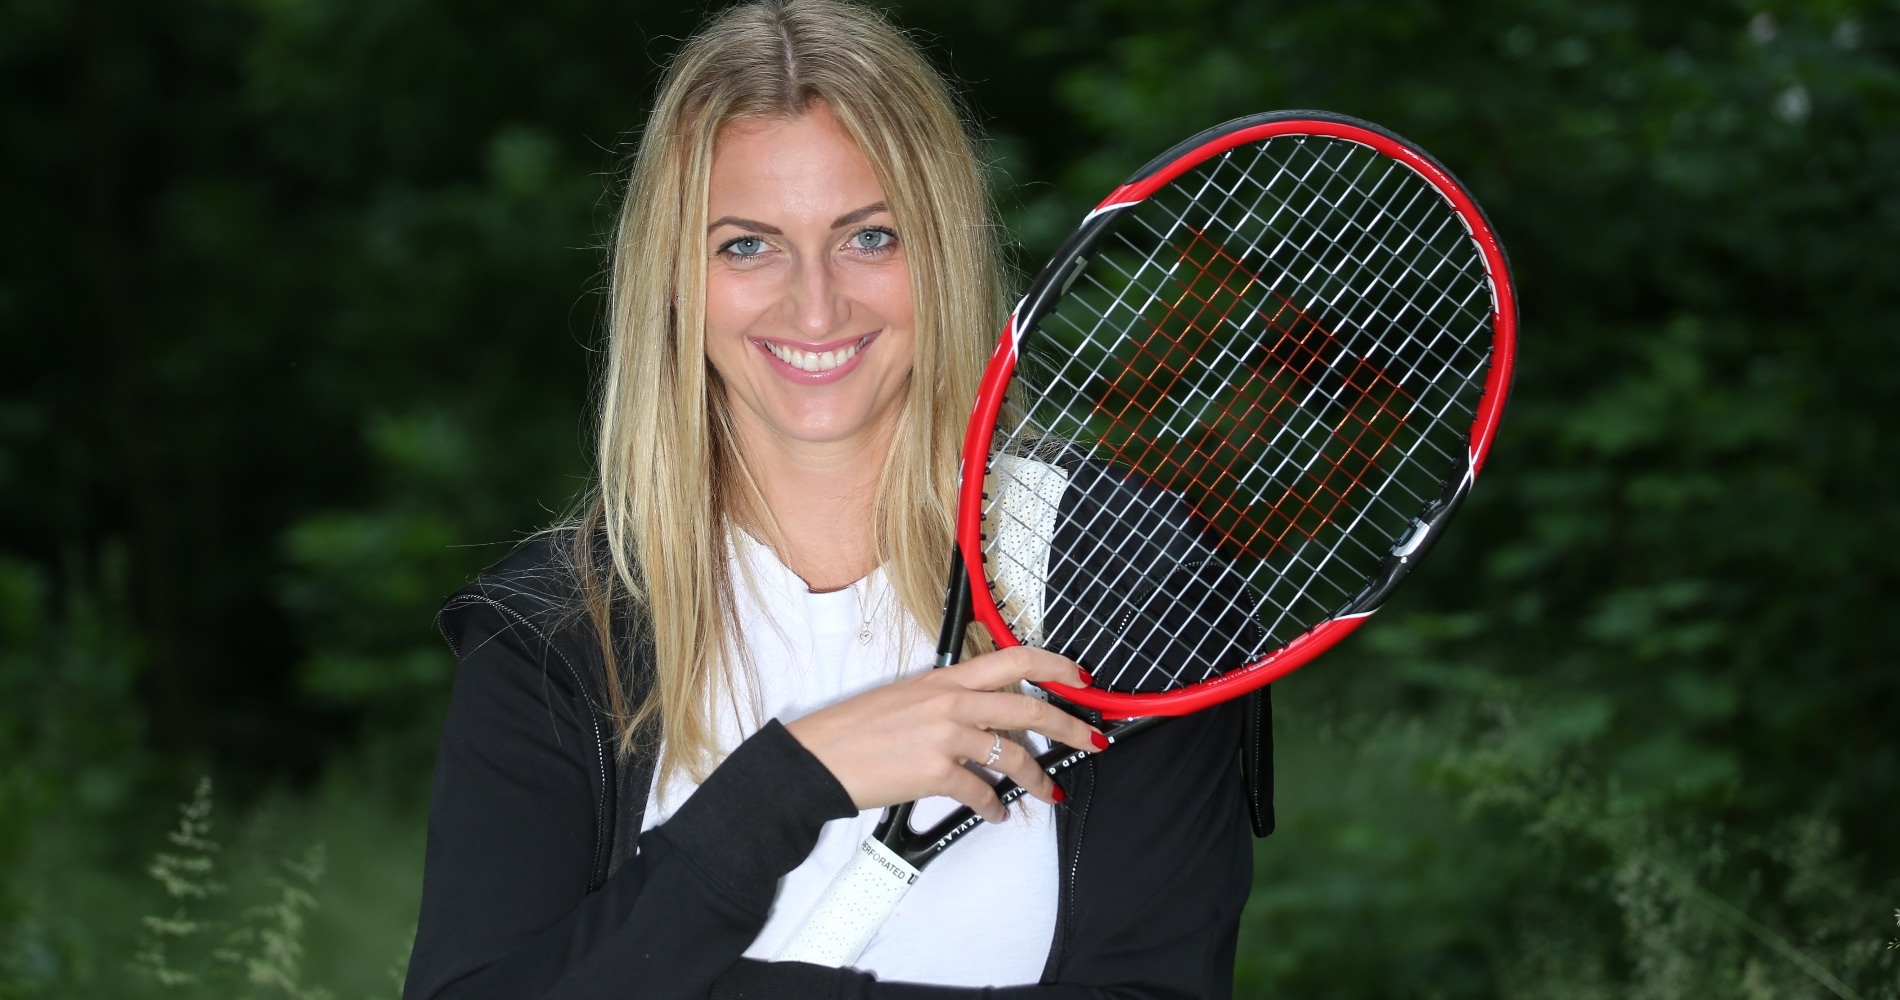 Kvitova “We all knew we could end up in quaratine”